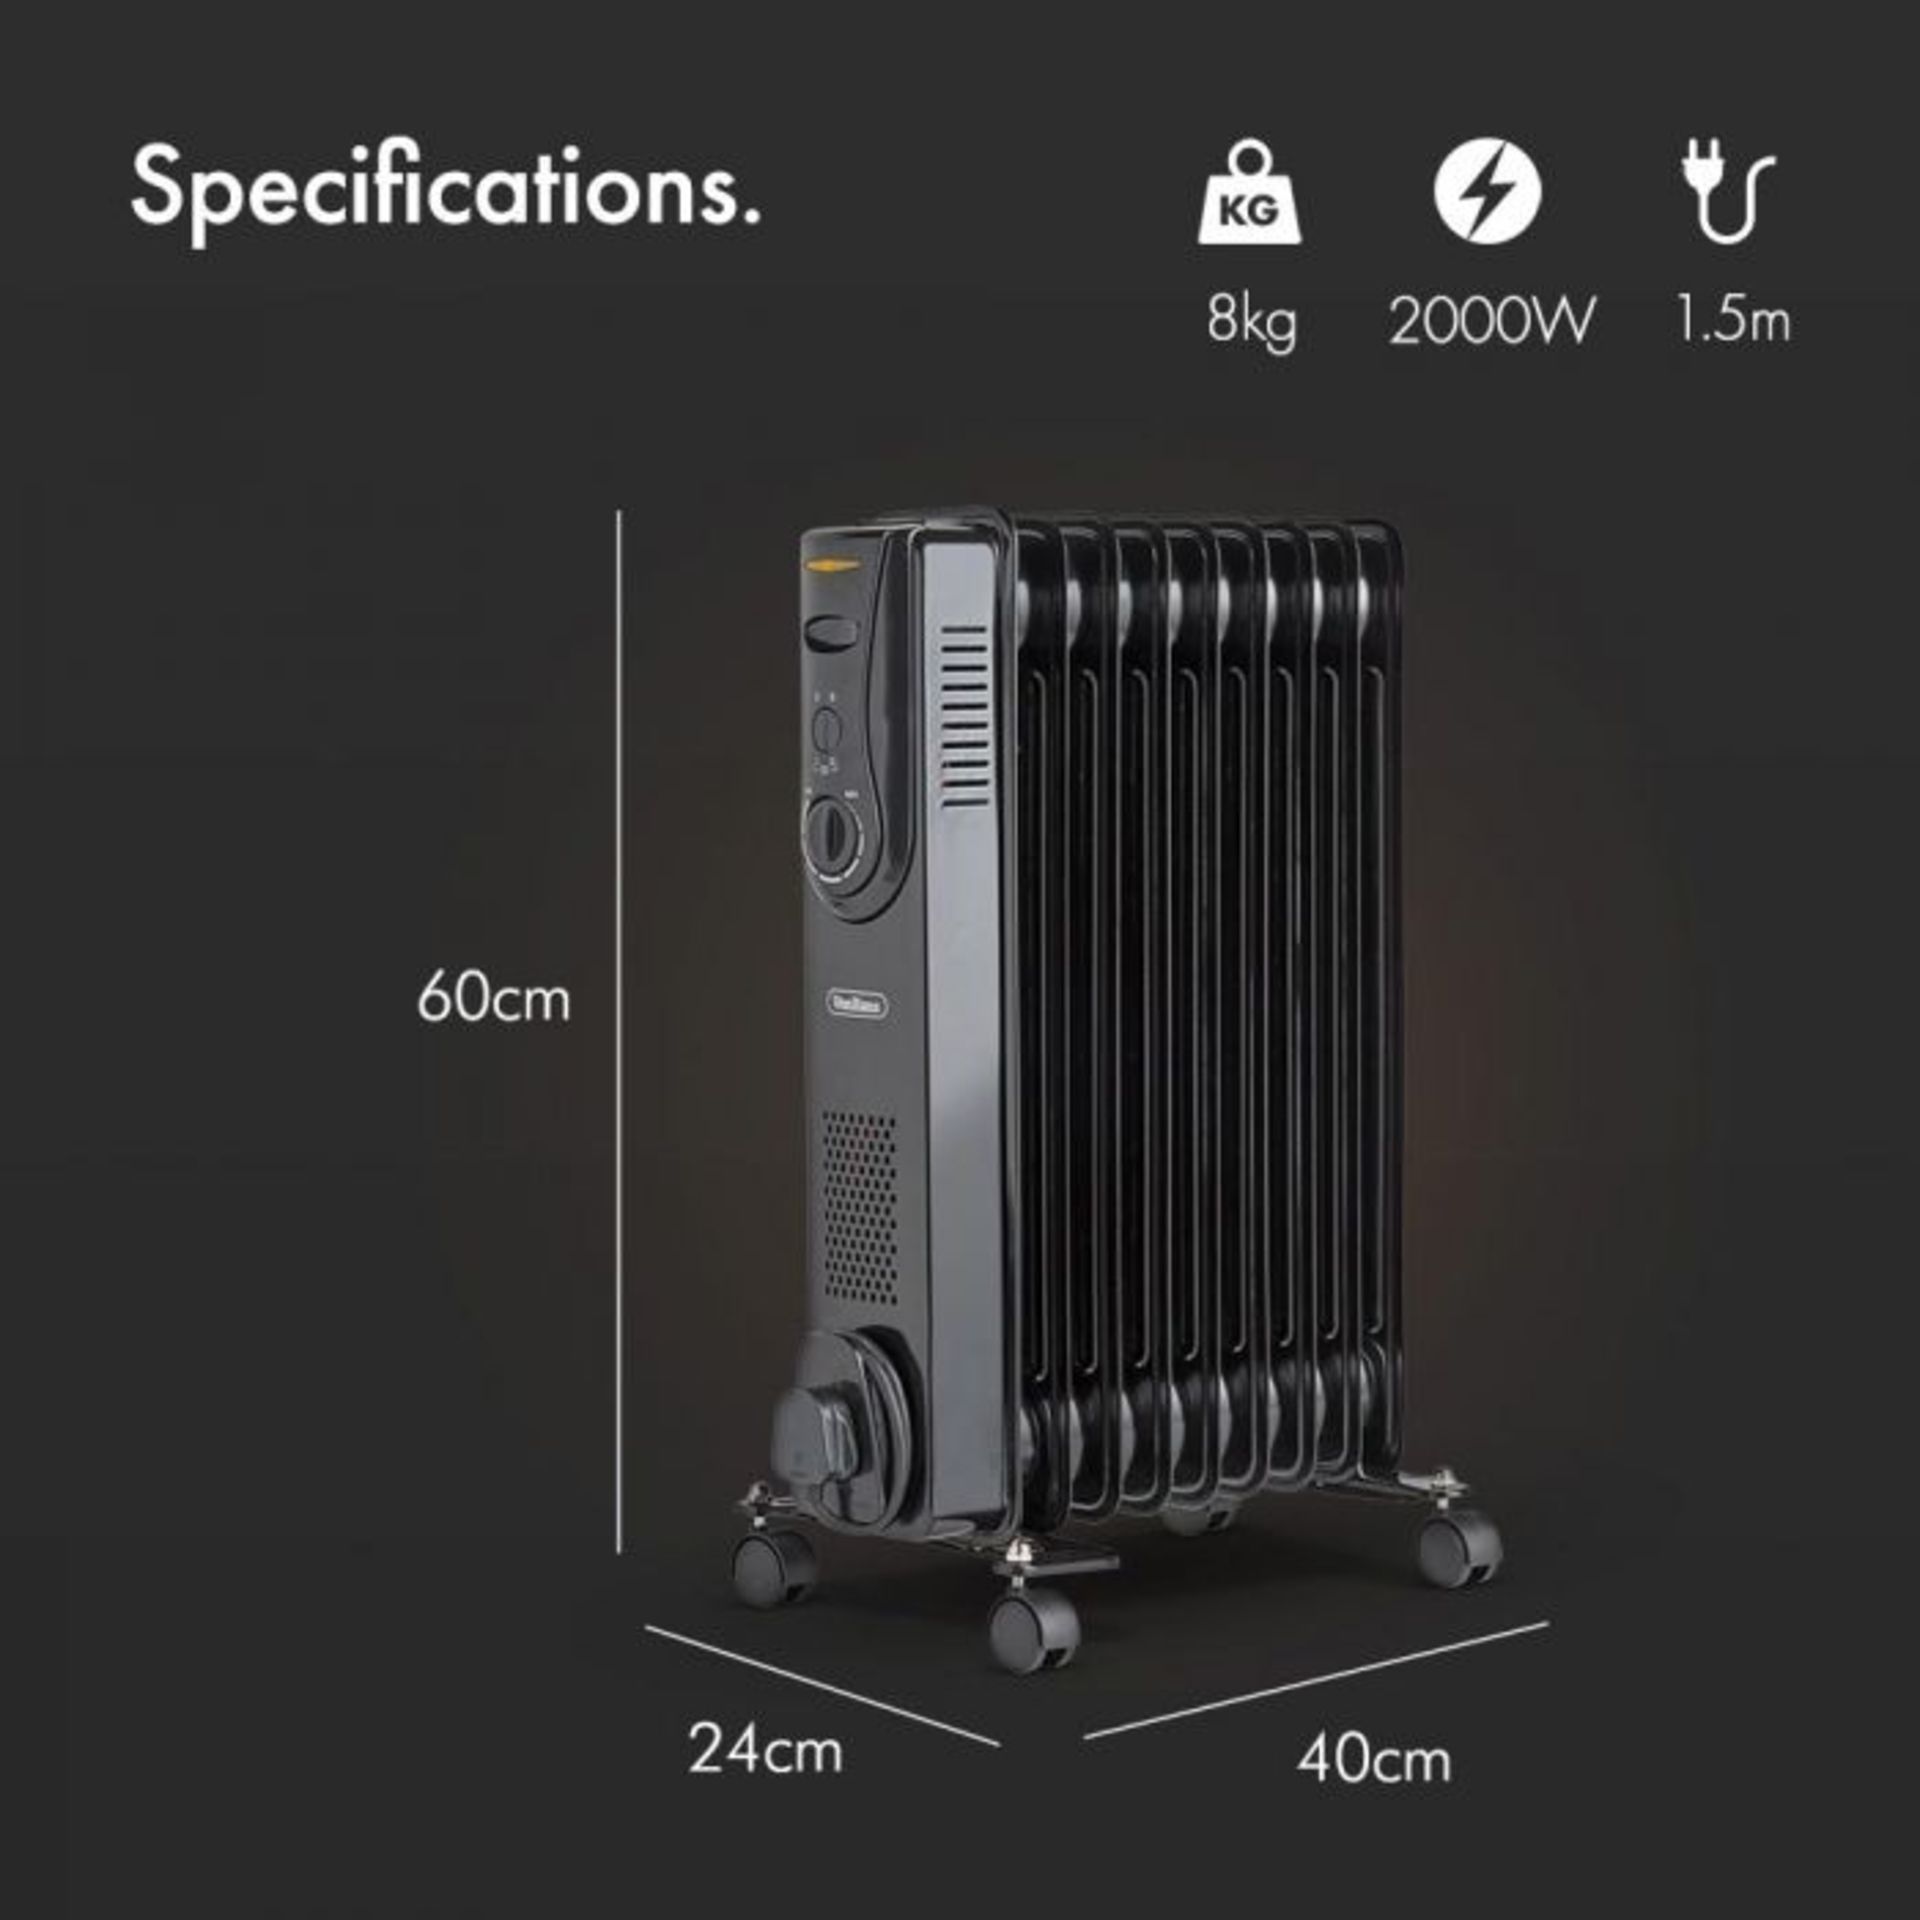 (V315) 9 Fin 2000W Oil Filled Radiator - Black Powerful 2000W radiator with 9 oil-filled fins ... - Image 3 of 4